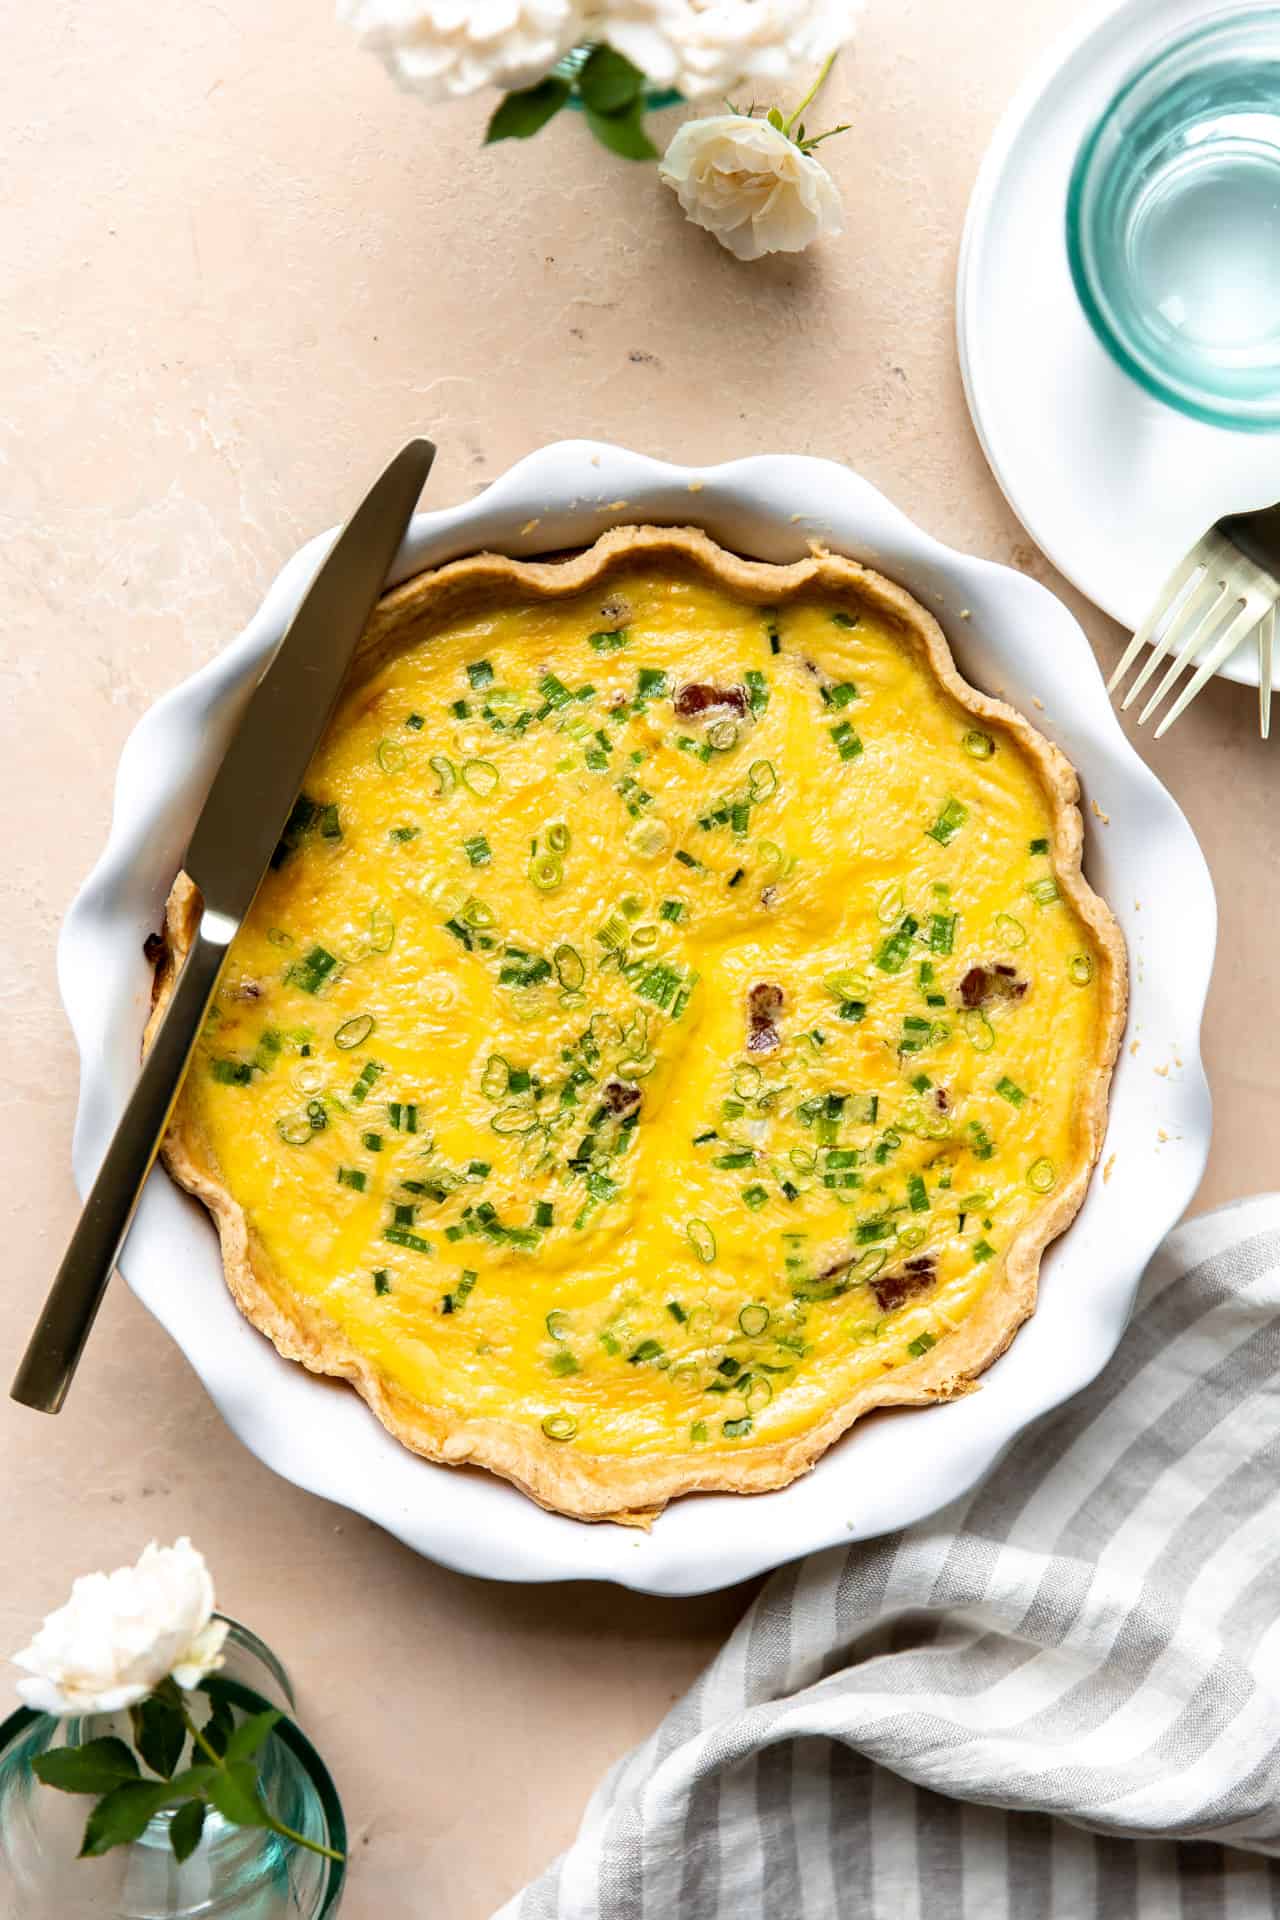 Basic Quiche Recipe (using any filling of your choice!) - House of